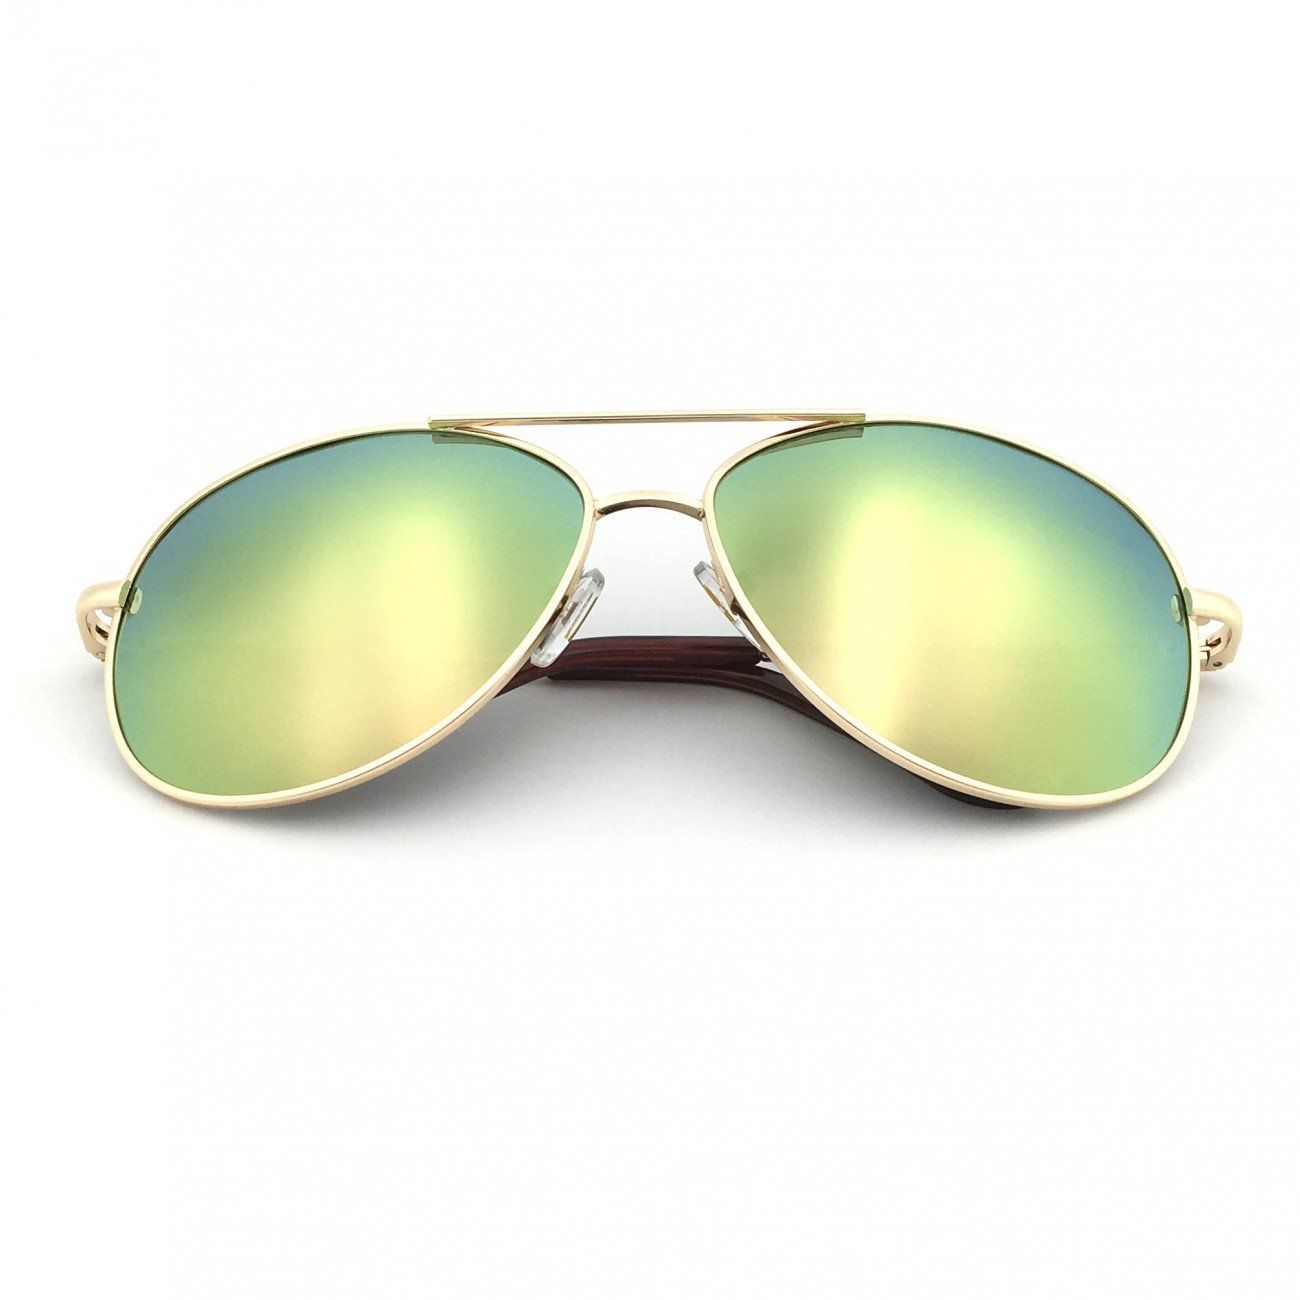 Aviator sunglasses with gold frame and green lenses